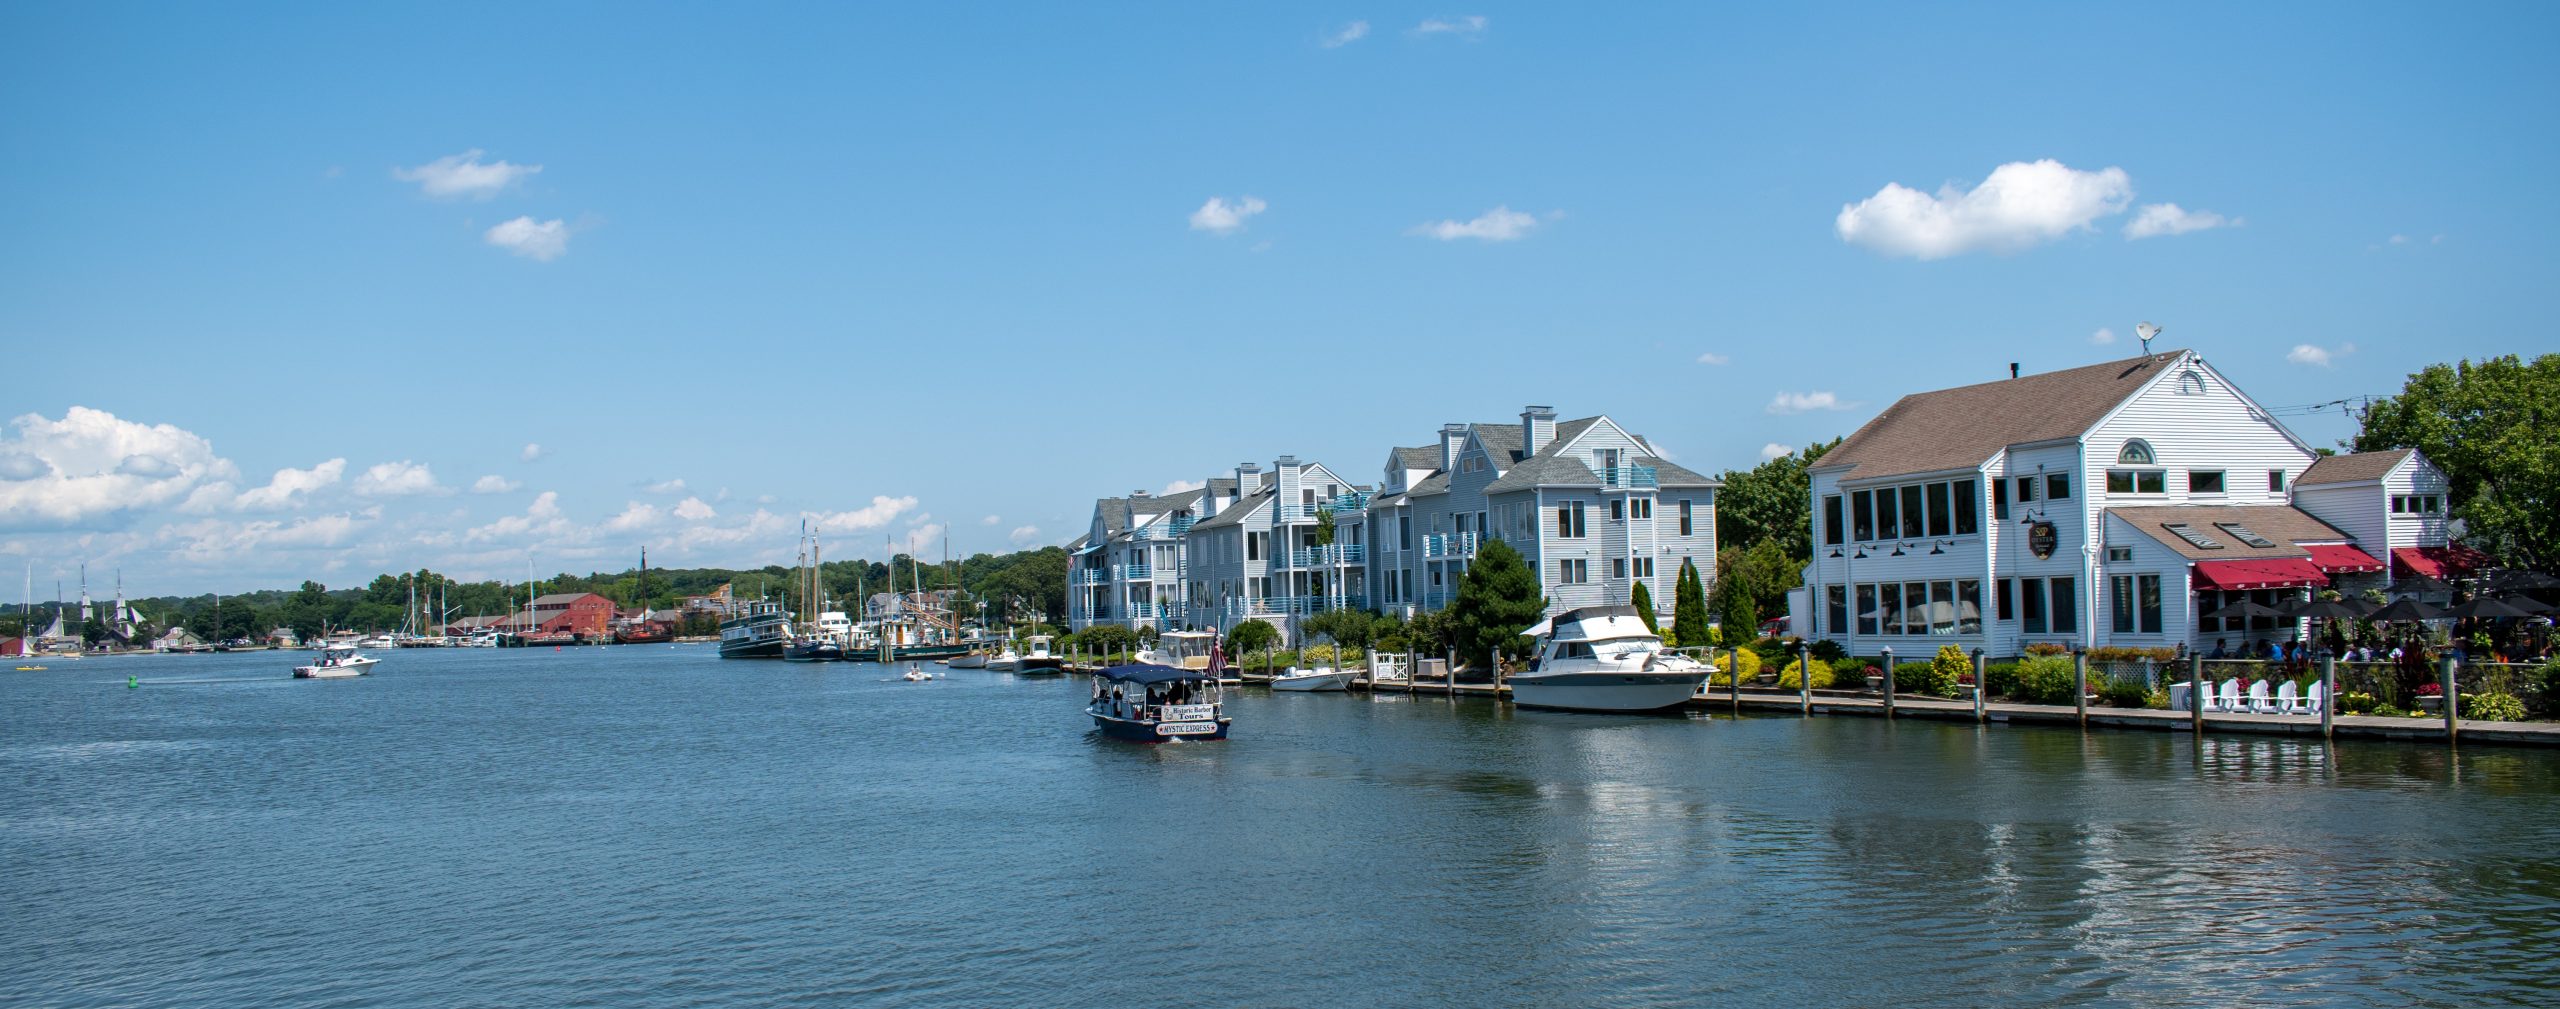 Things to do in Mystic Connecticut photo courtesy of Rusty Watson on Unsplash